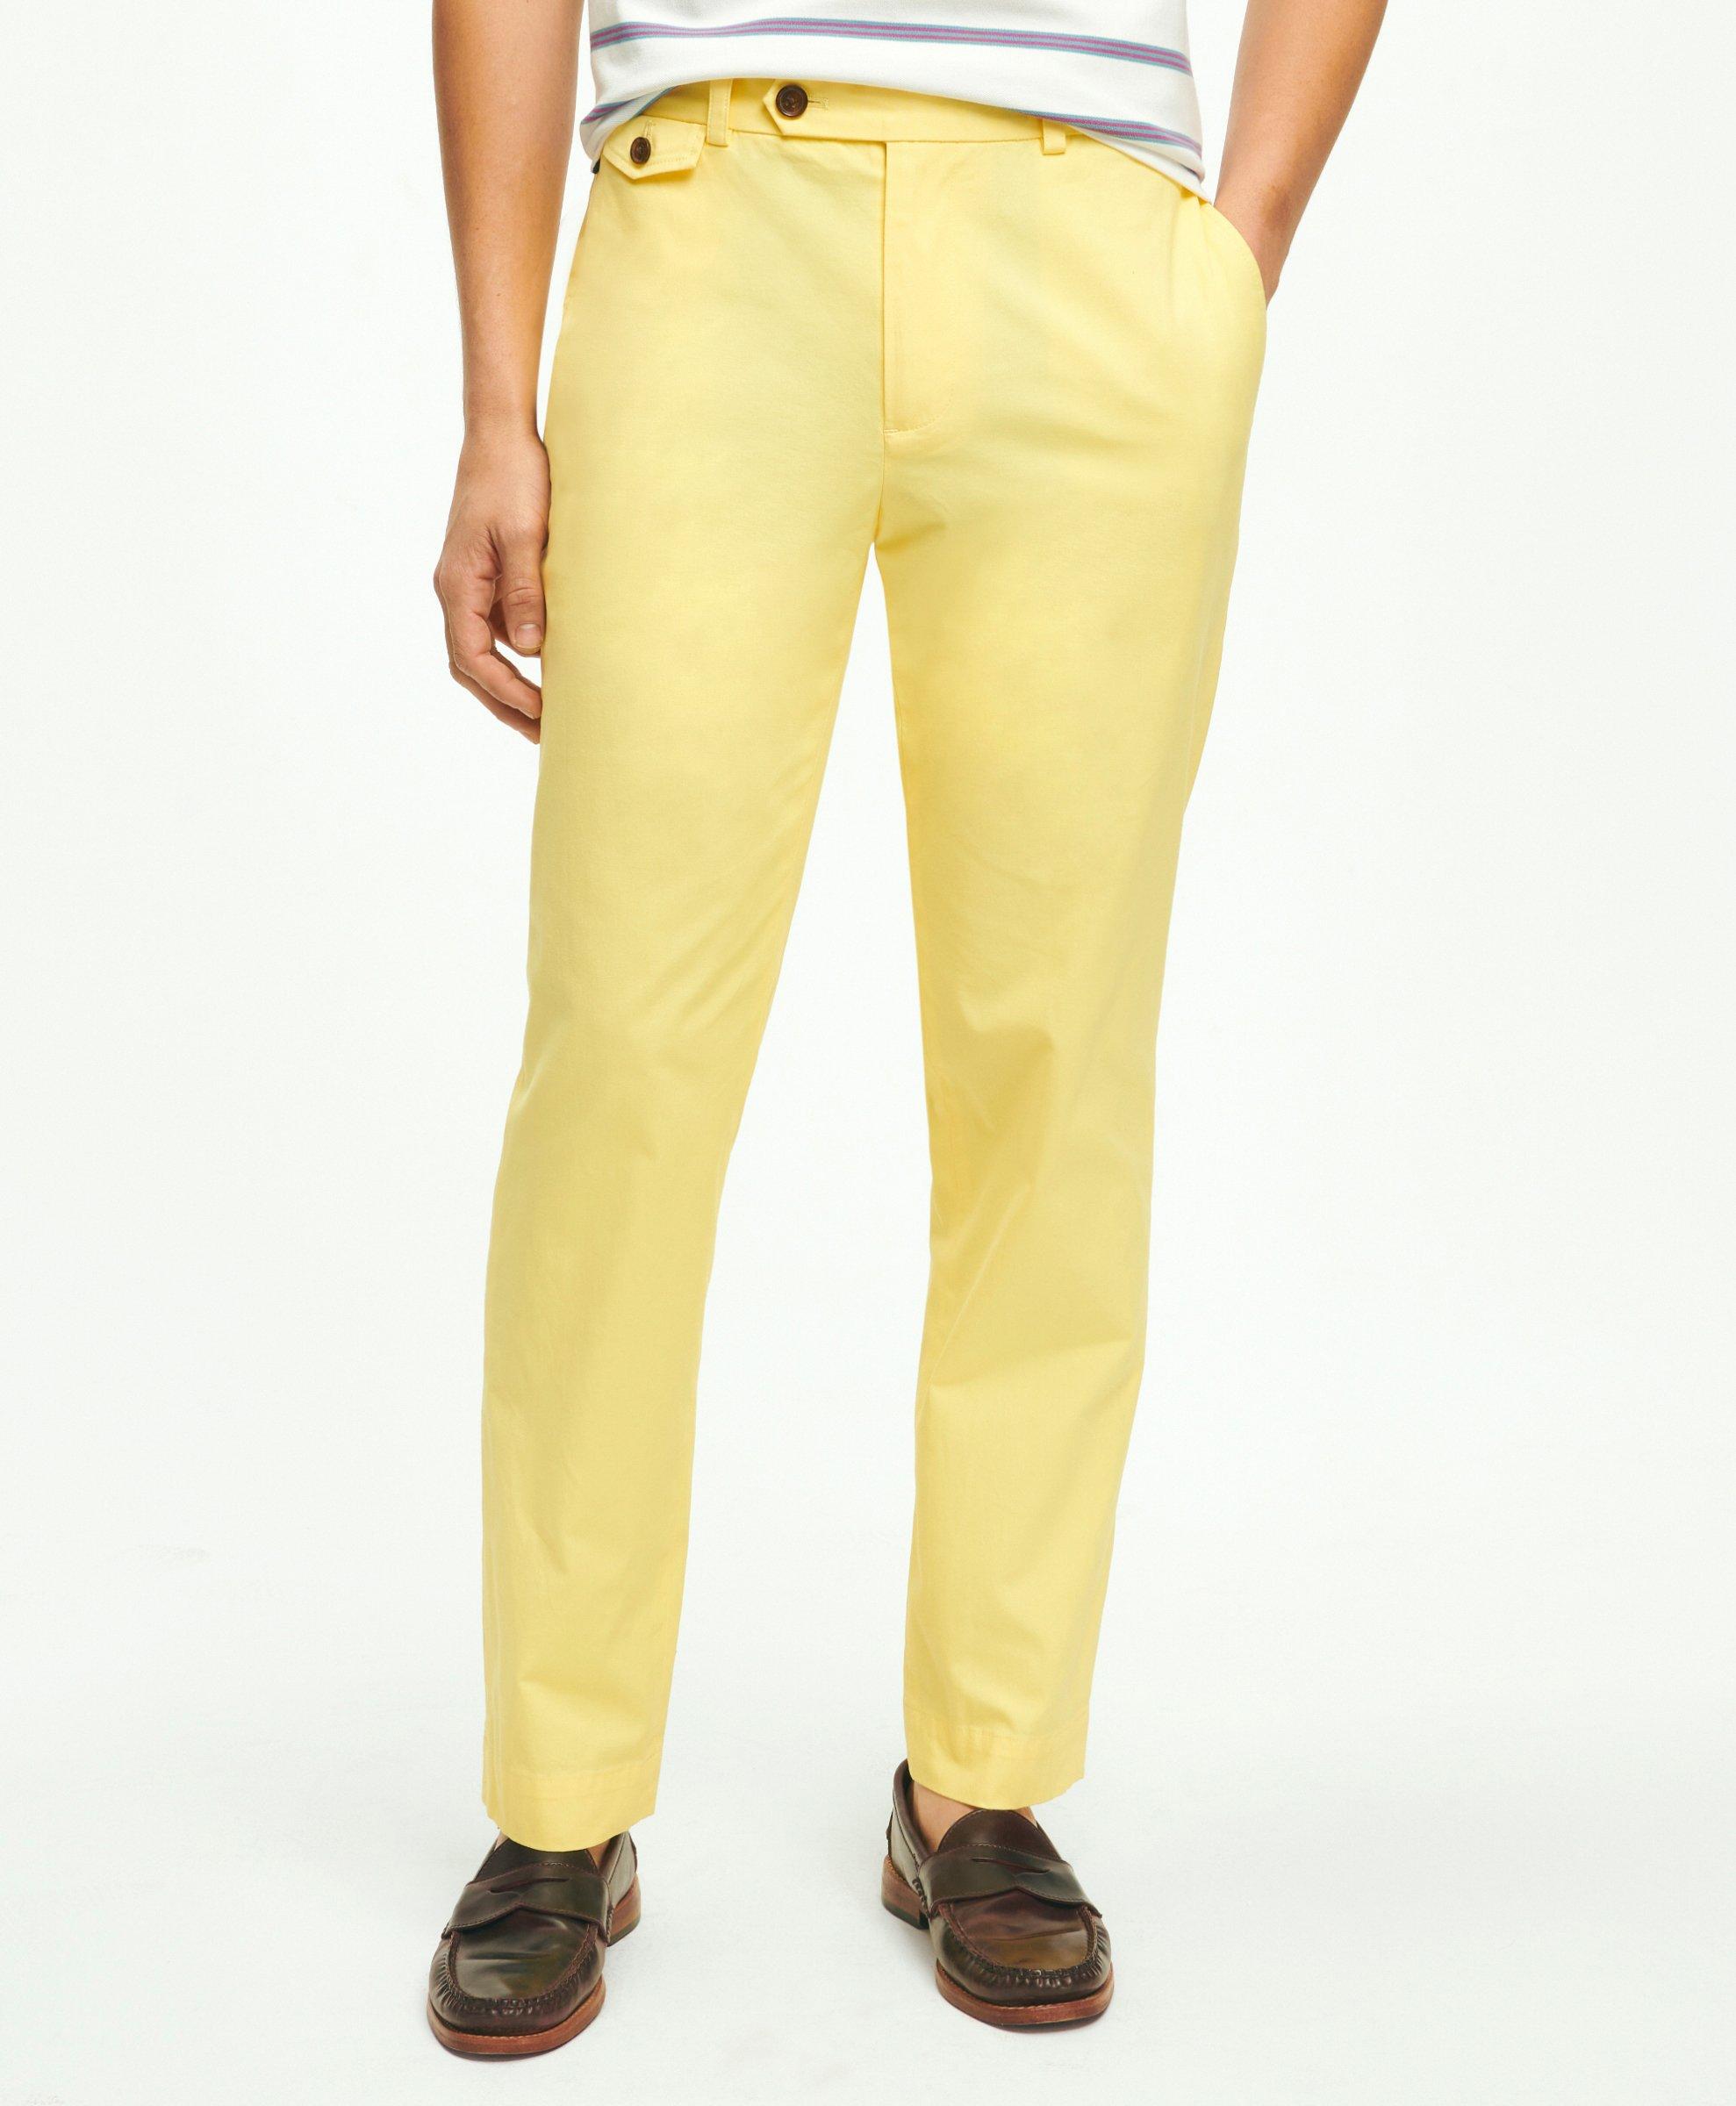 Shop Brooks Brothers Slim Fit Canvas Poplin Chinos In Supima Cotton Pants | Yellow | Size 35 32